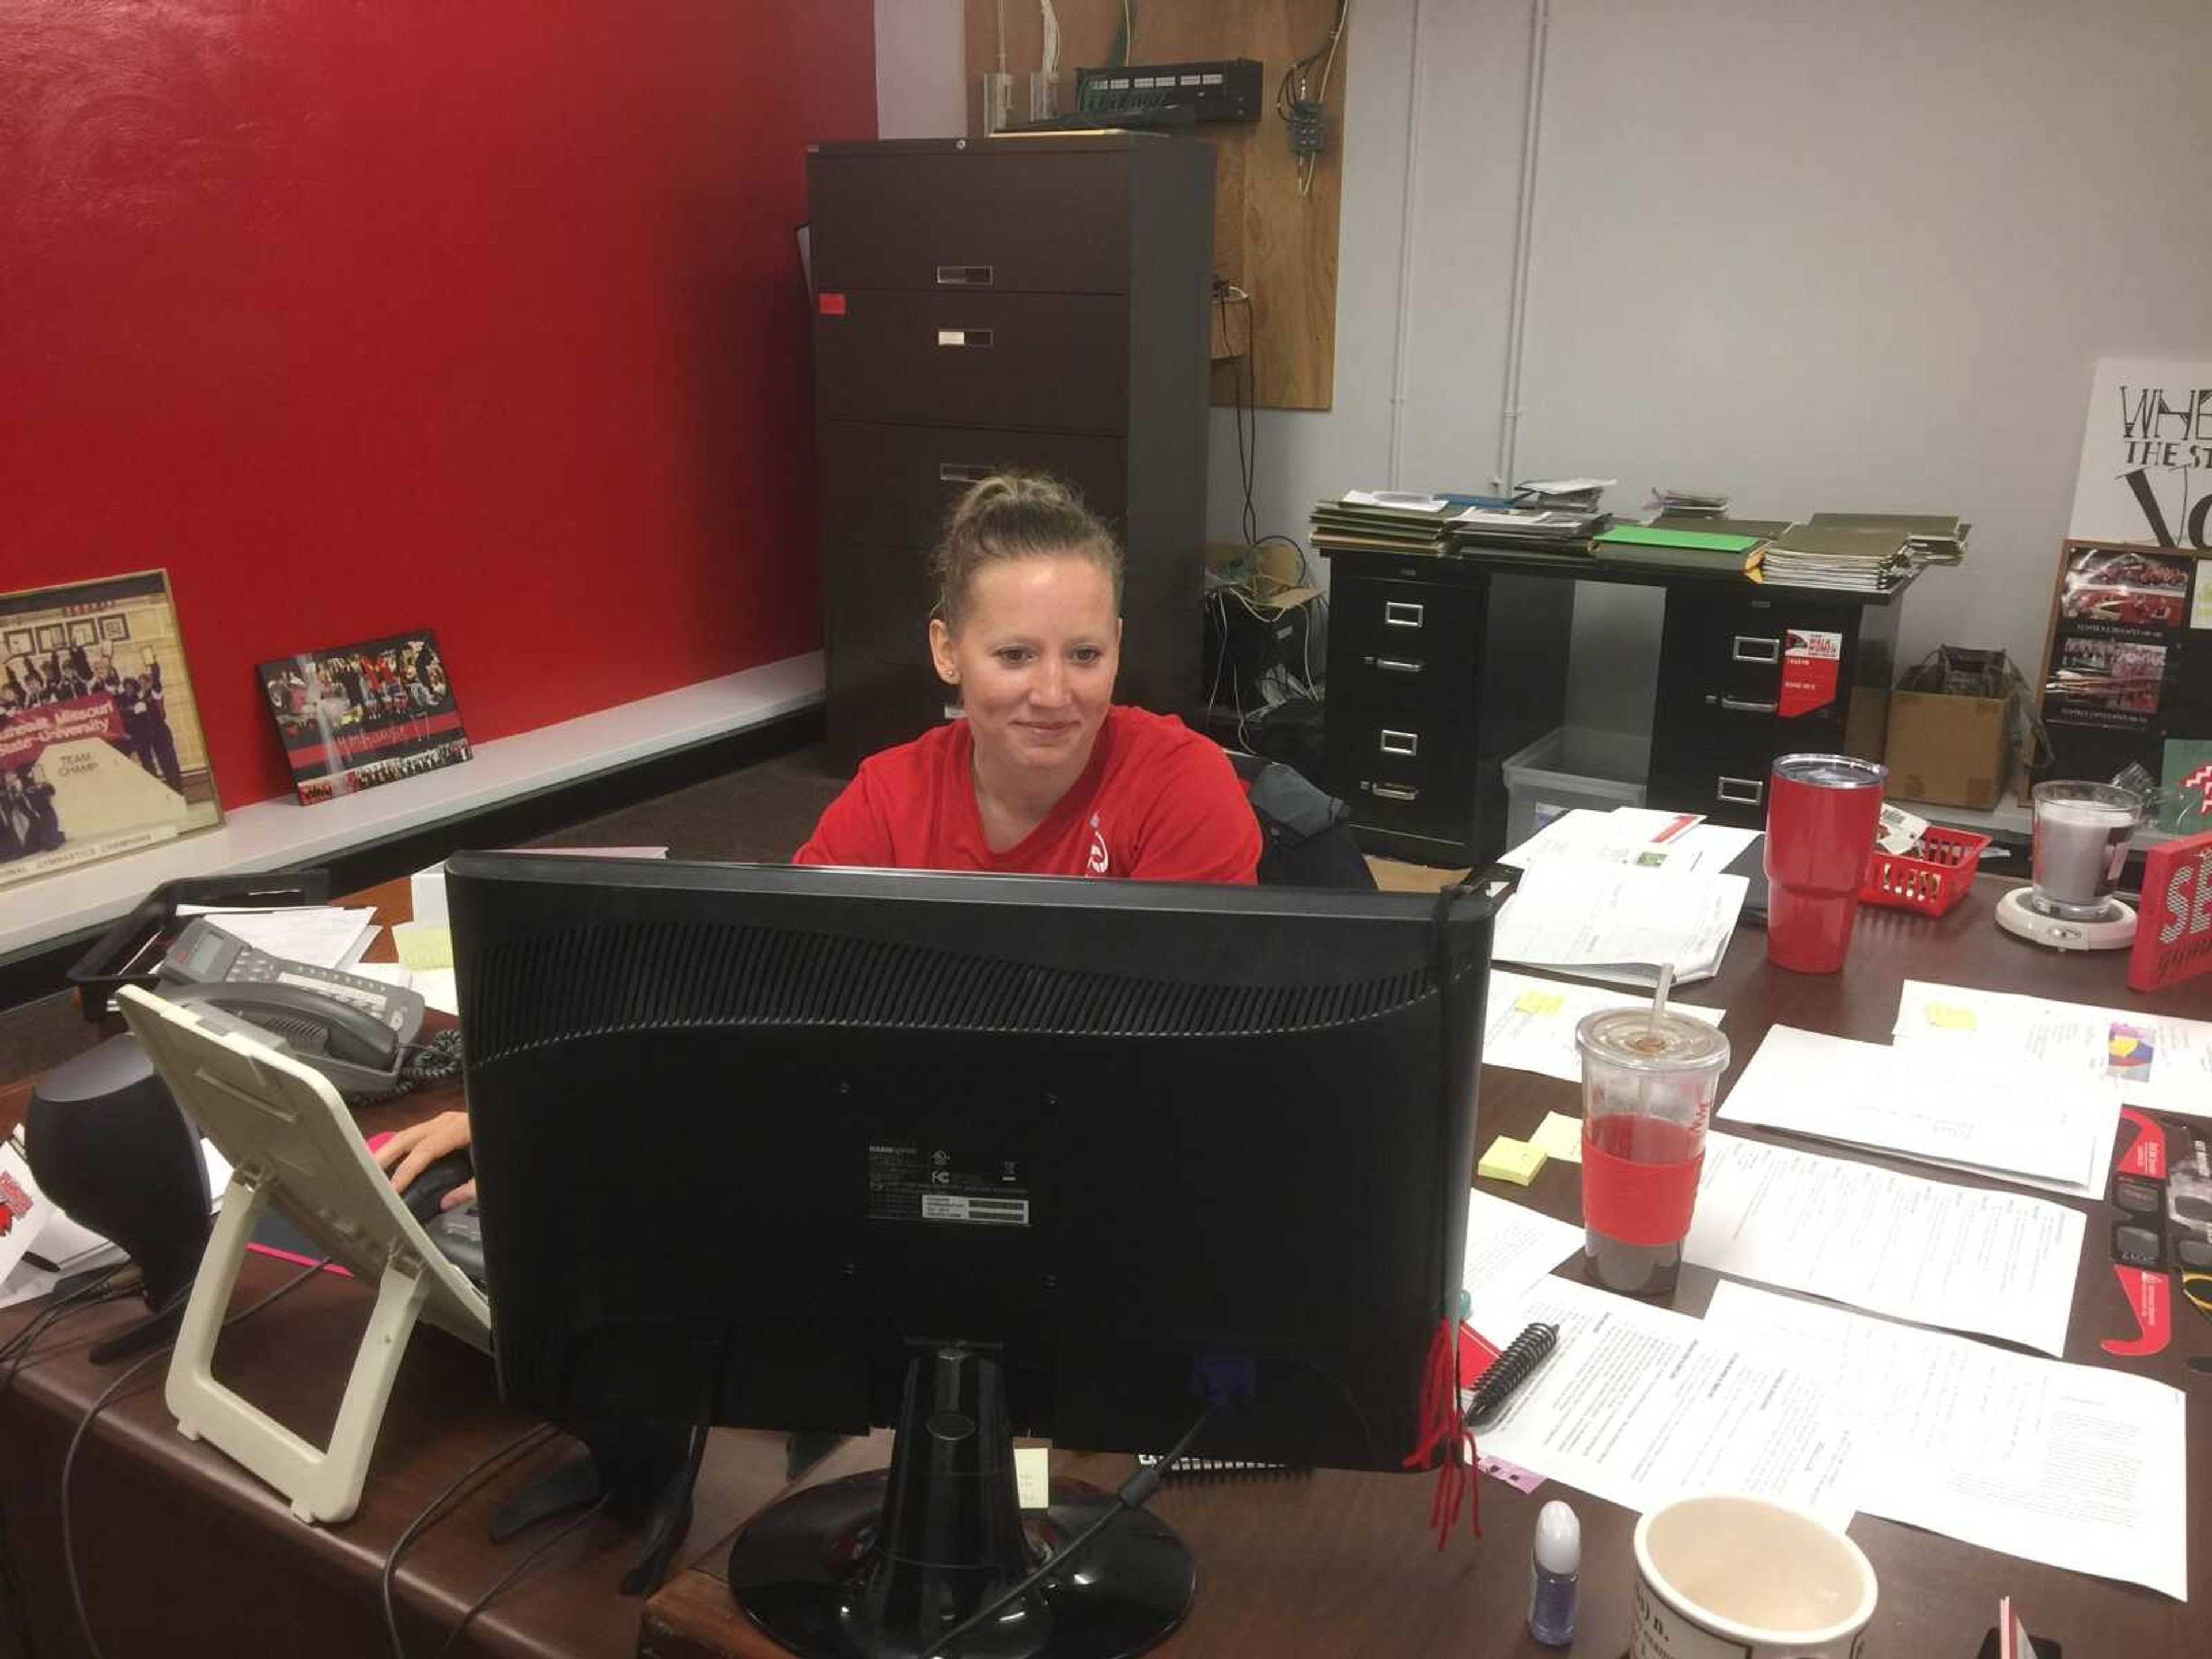 In between practices, phone calls and emails. Southeast Women's Gymnastics head coach Kristi Ewasko works on homework for her degree program.      